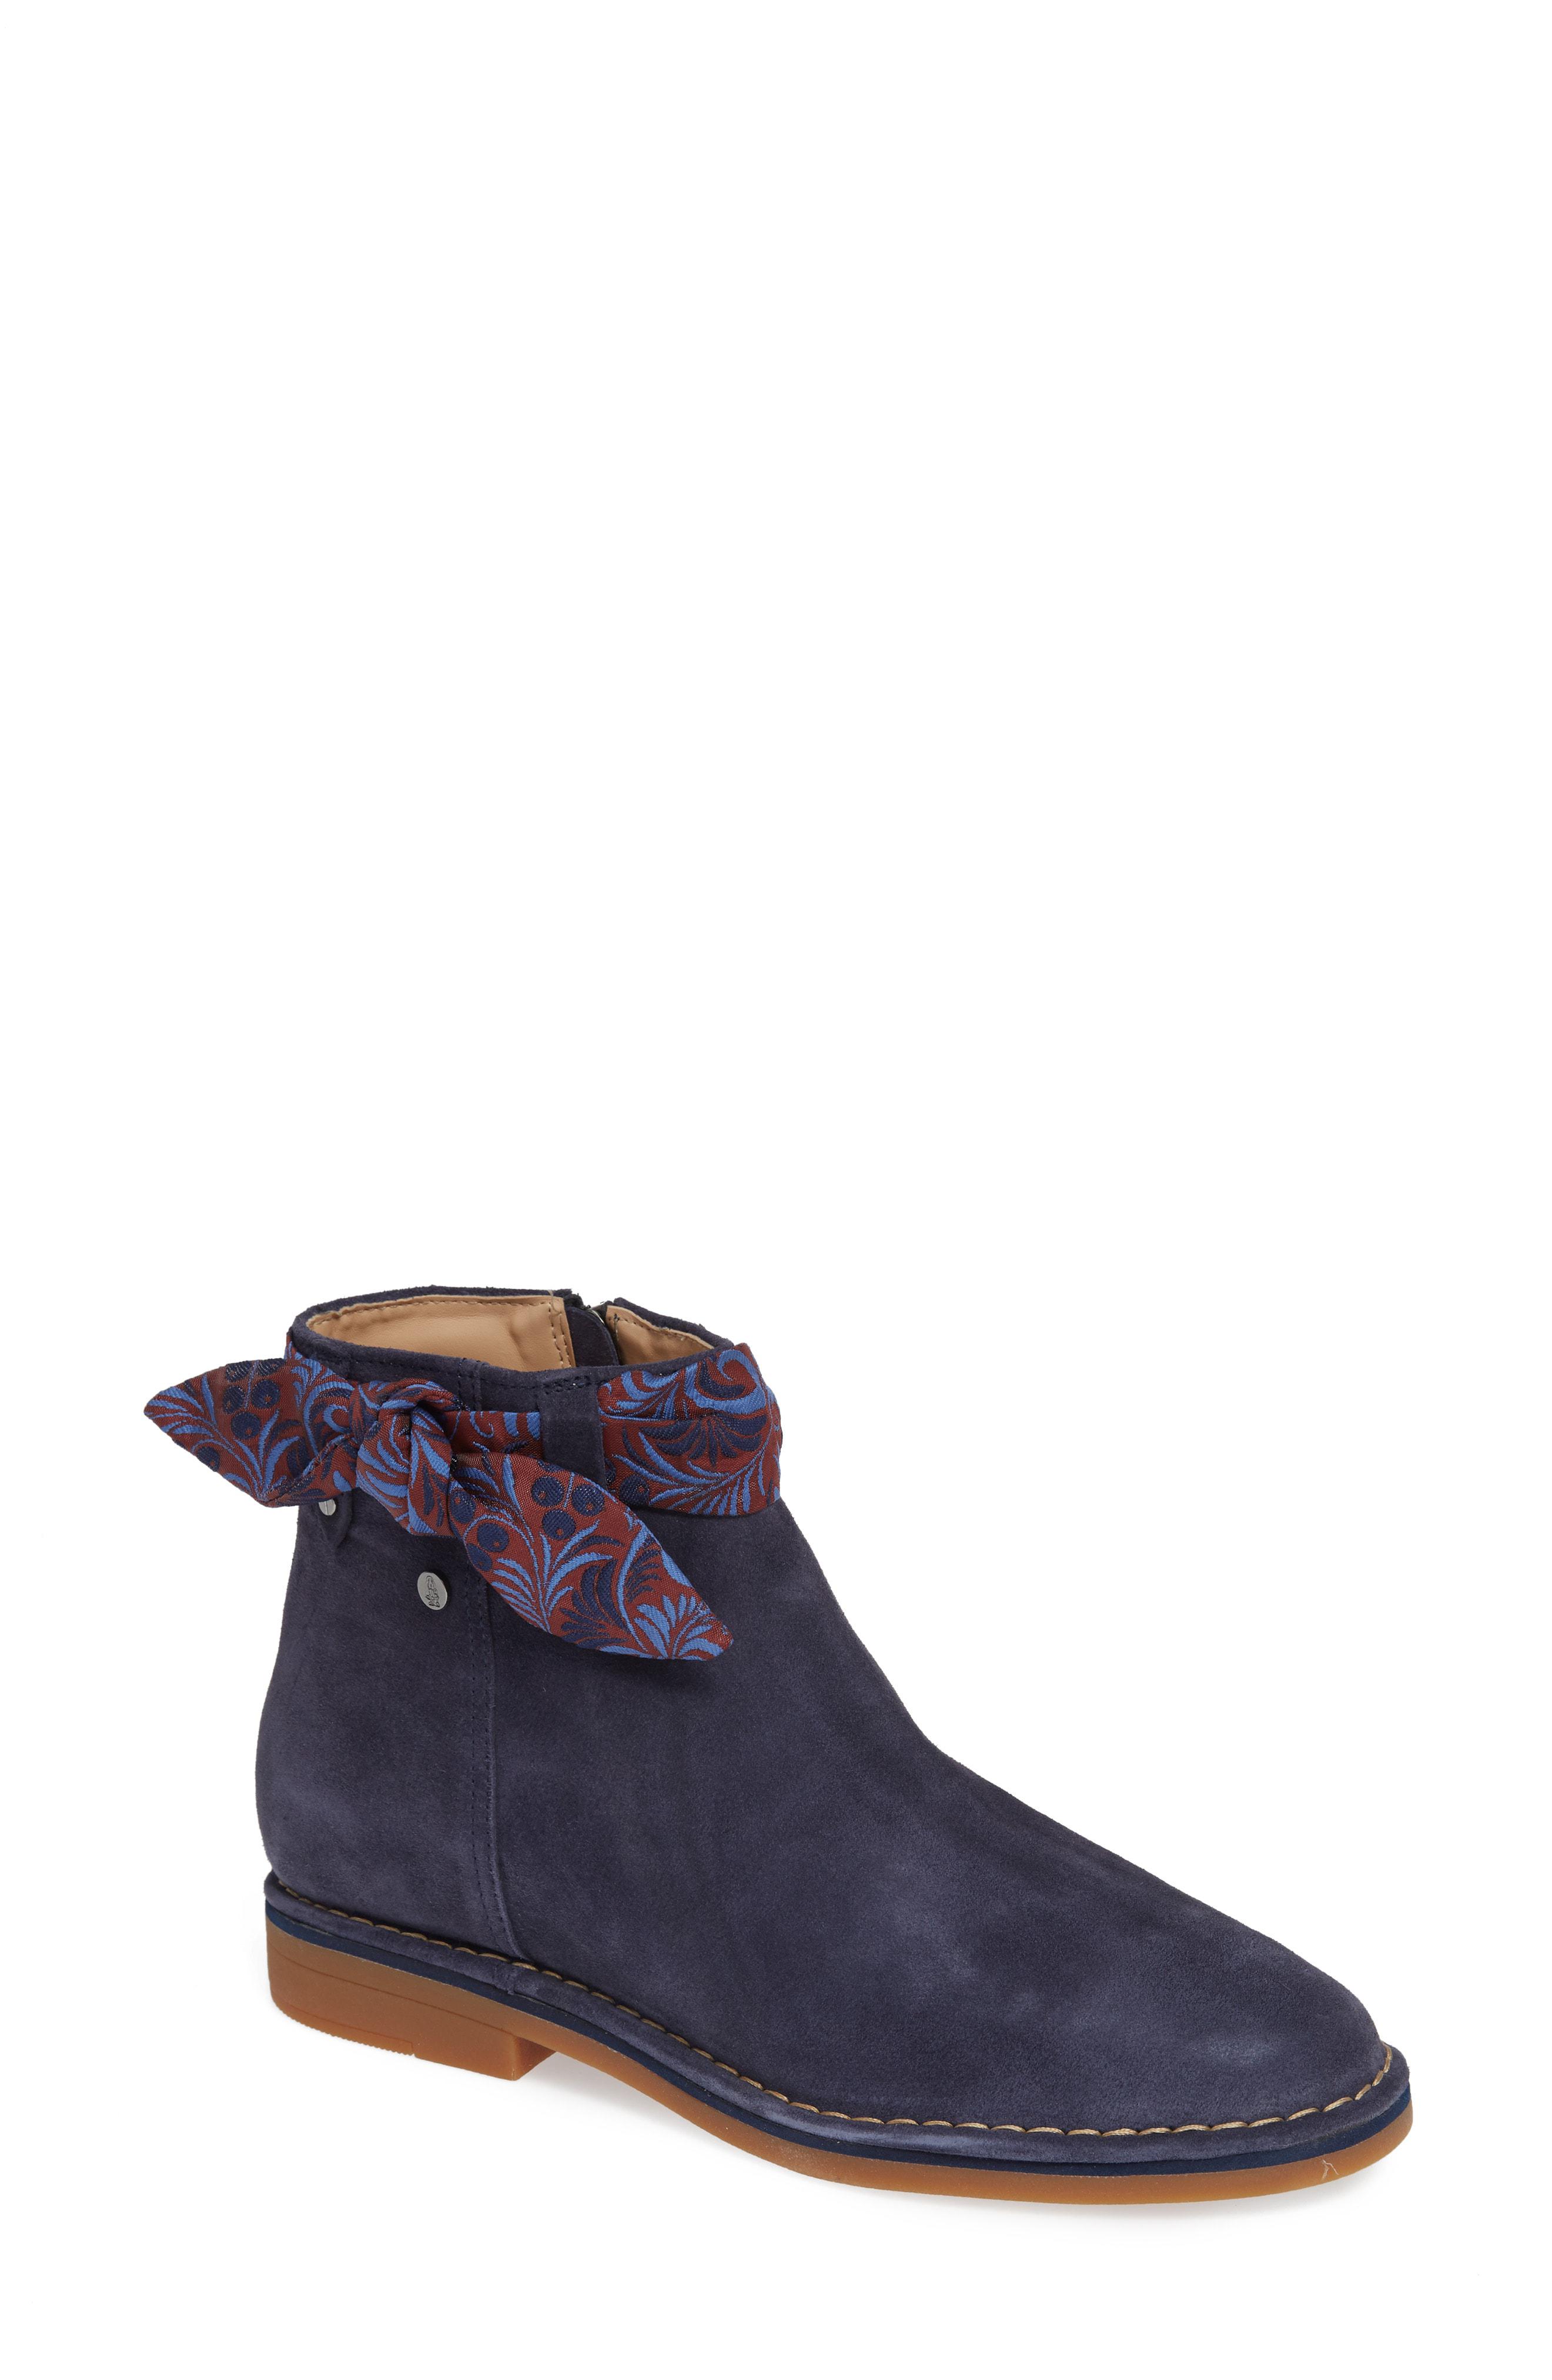 hush puppies catelyn bow boot